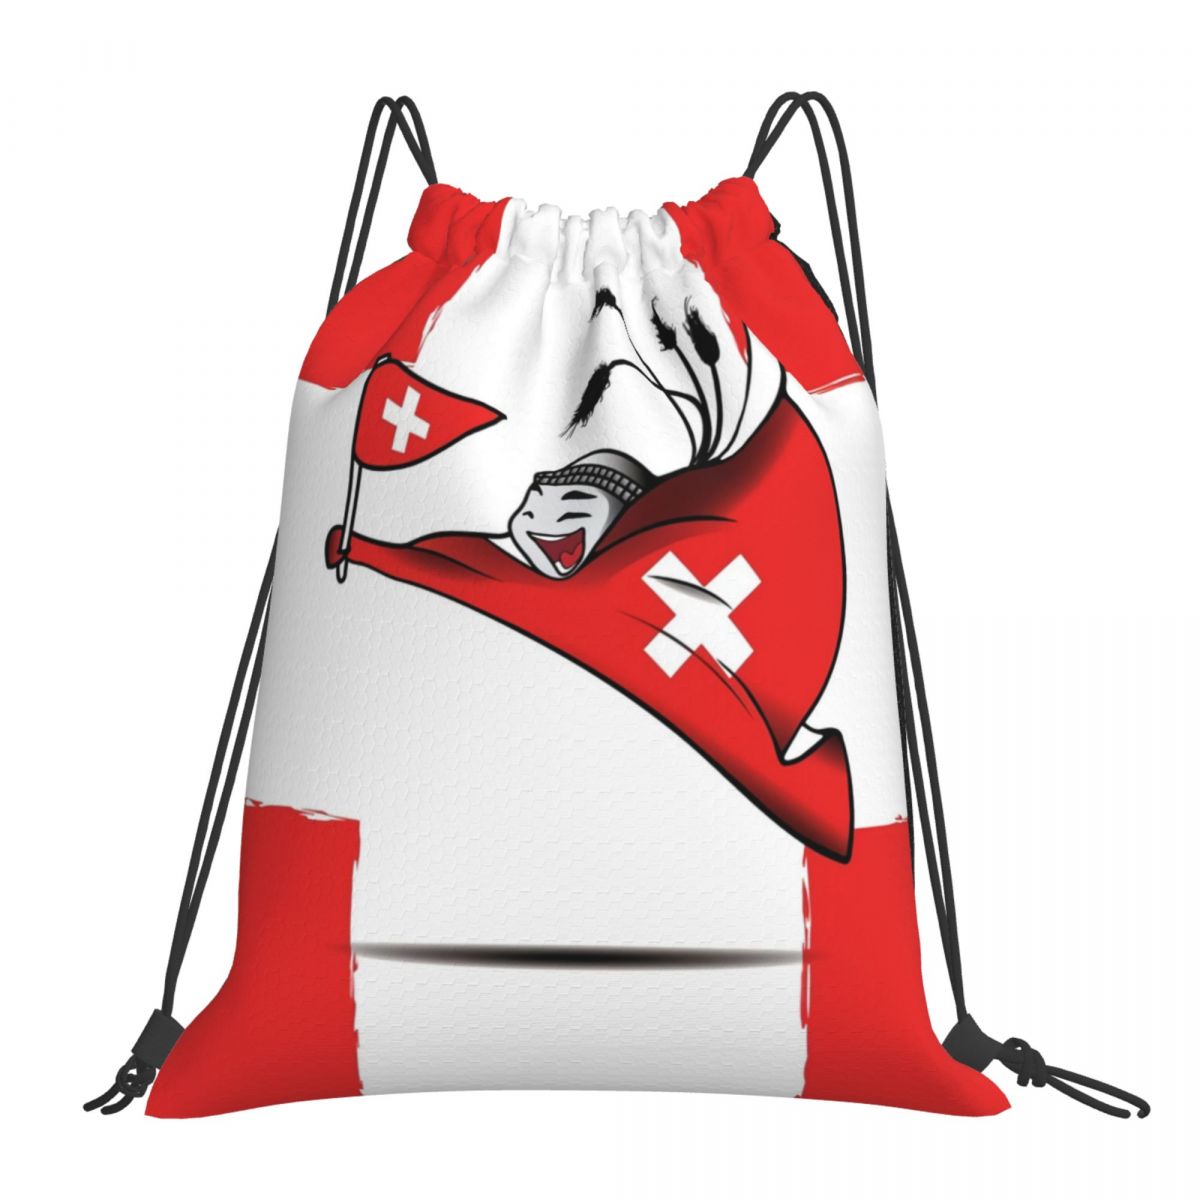 Switzerland World Cup 2022 Mascot Drawstring Bags for School Gym